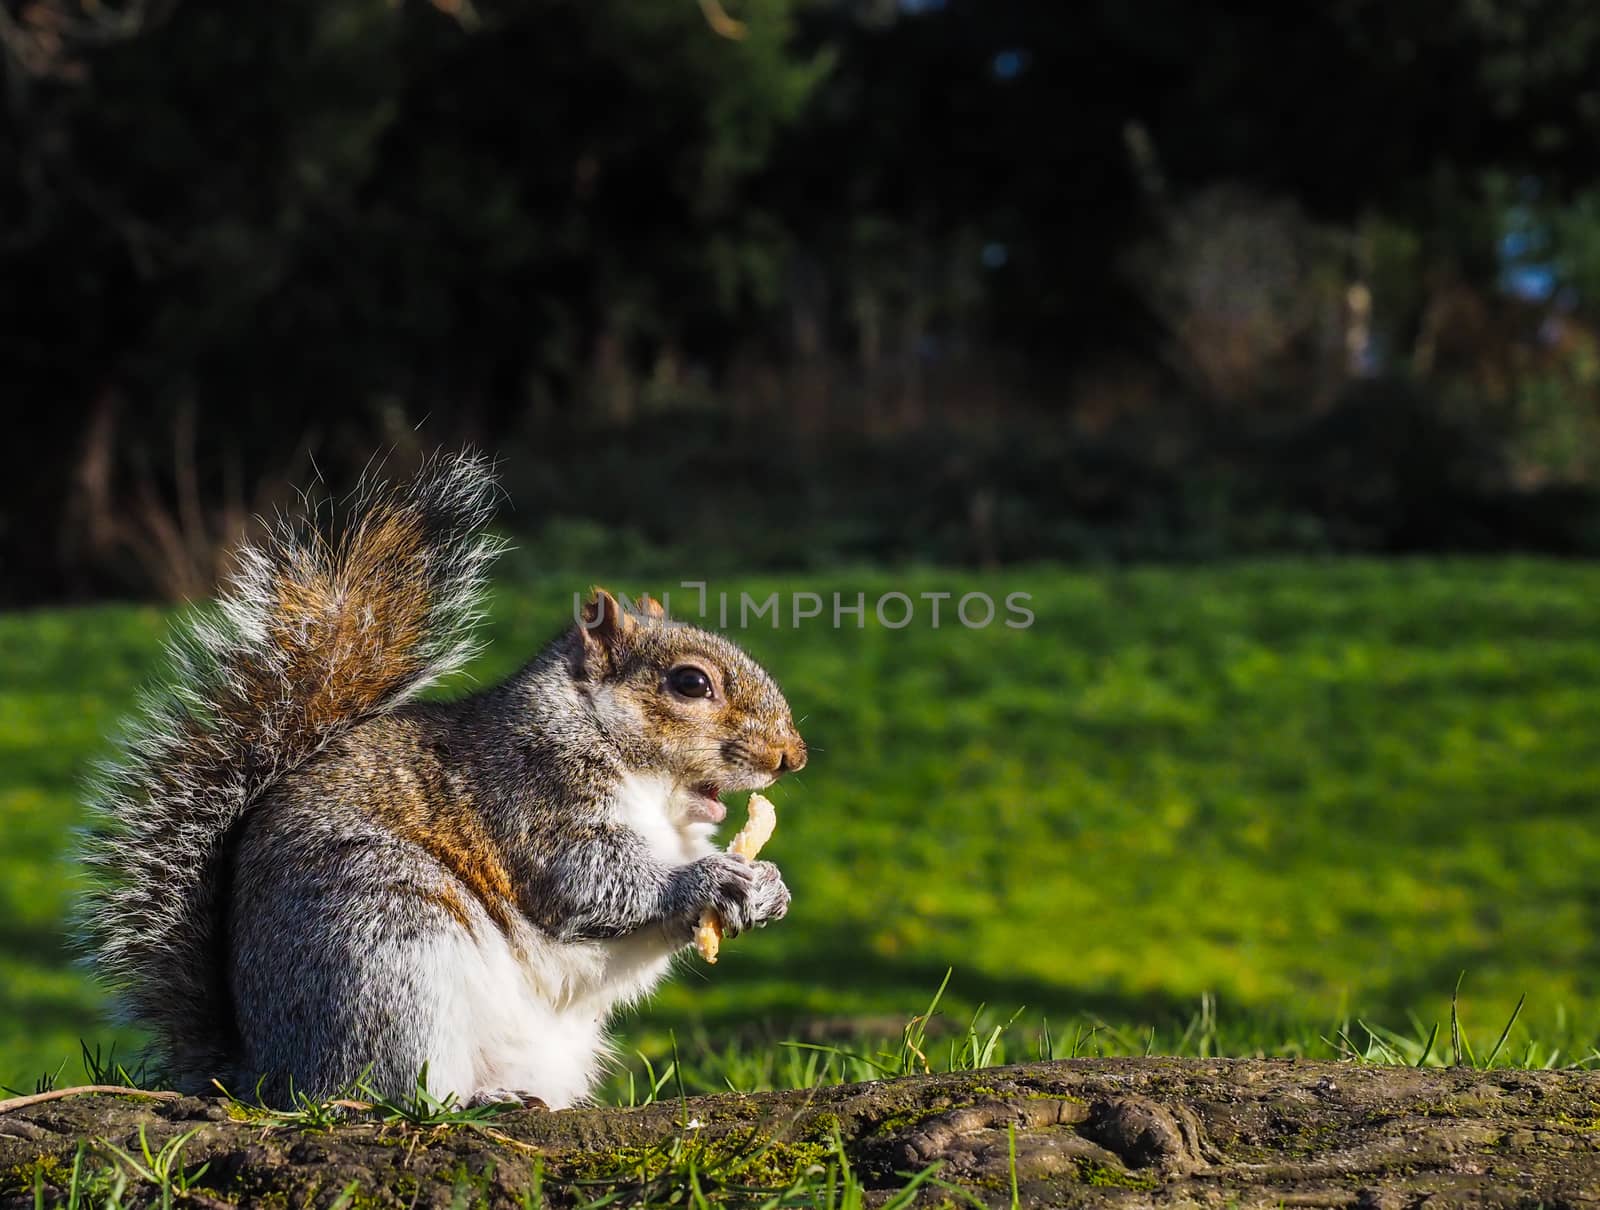 Squirrel eating on a treat in a park in sunlight with green gras by Arvebettum